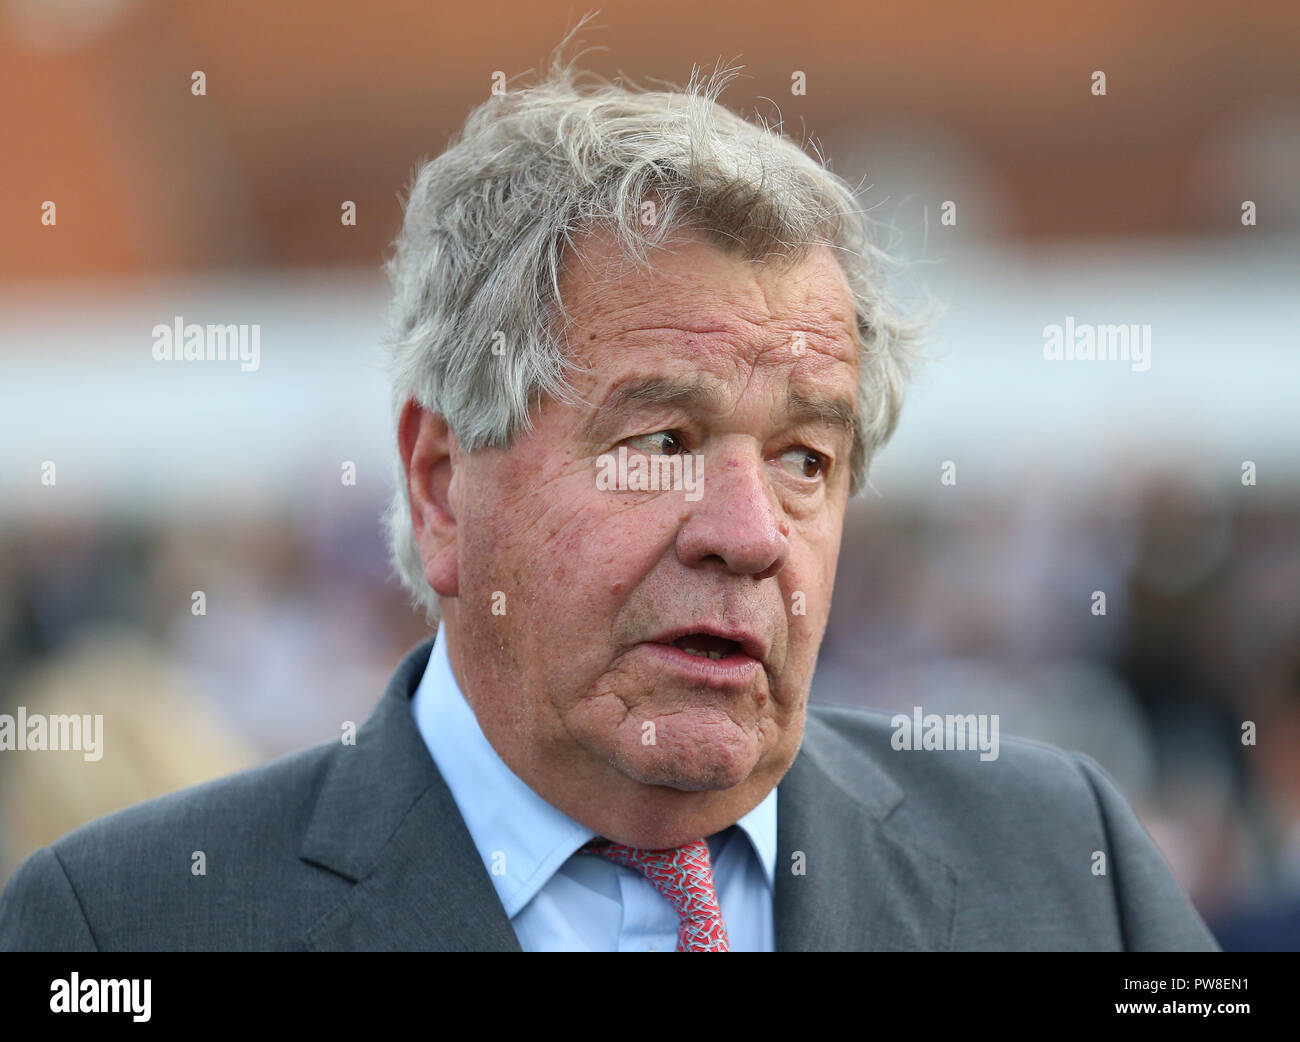 Sir Michael Stoute race horse trainer (Newmarket) during day two of the  Dubai Future Champions Festival at Newmarket Racecourse. PRESS ASSOCIATION  Photo. Picture date: Saturday October 13, 2018. See PA story RACING